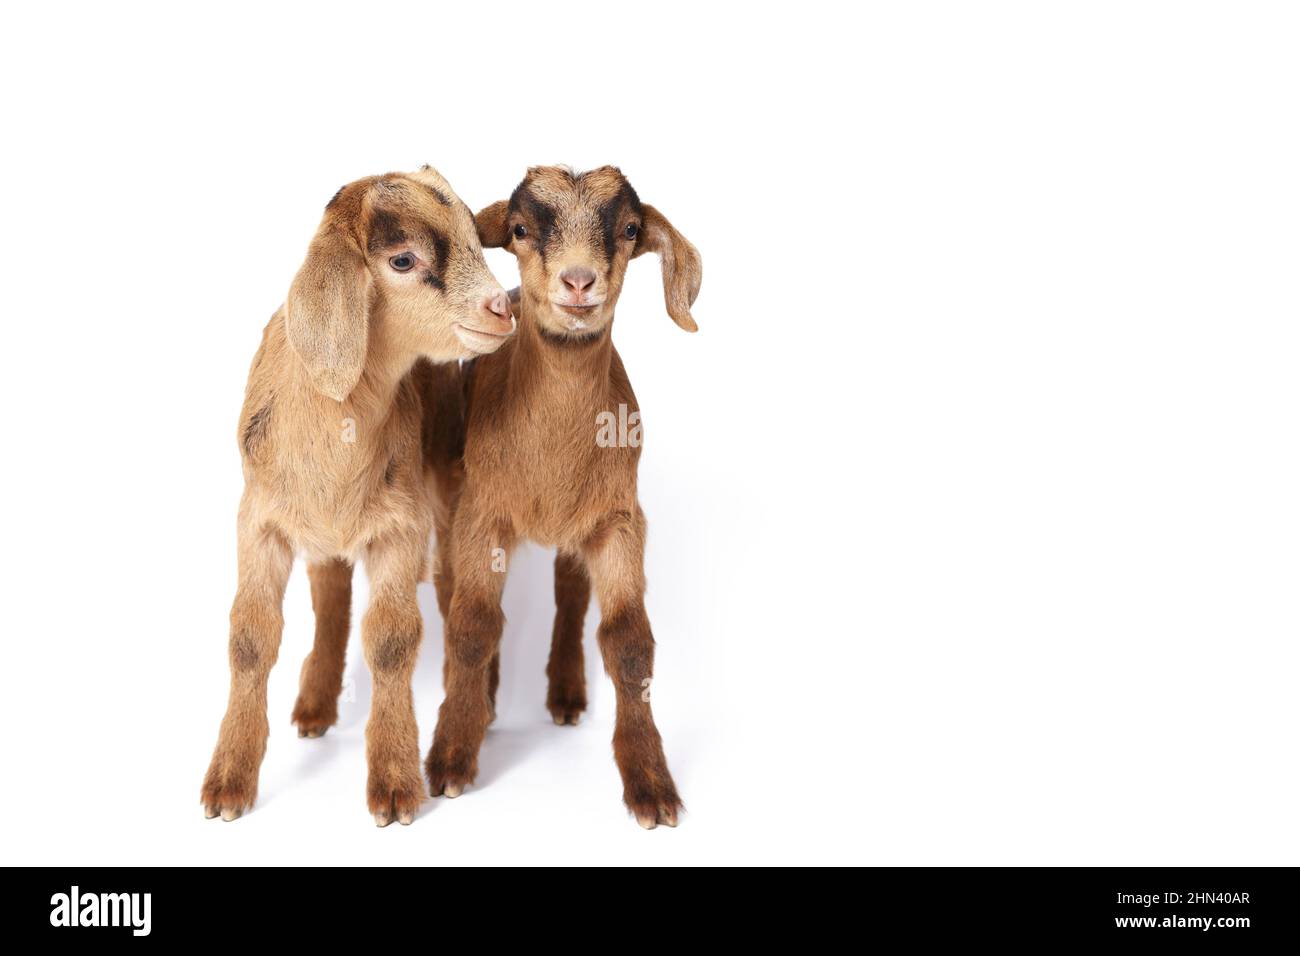 Domestic goat. Two kids standing, seen against a white background. Germany Stock Photo